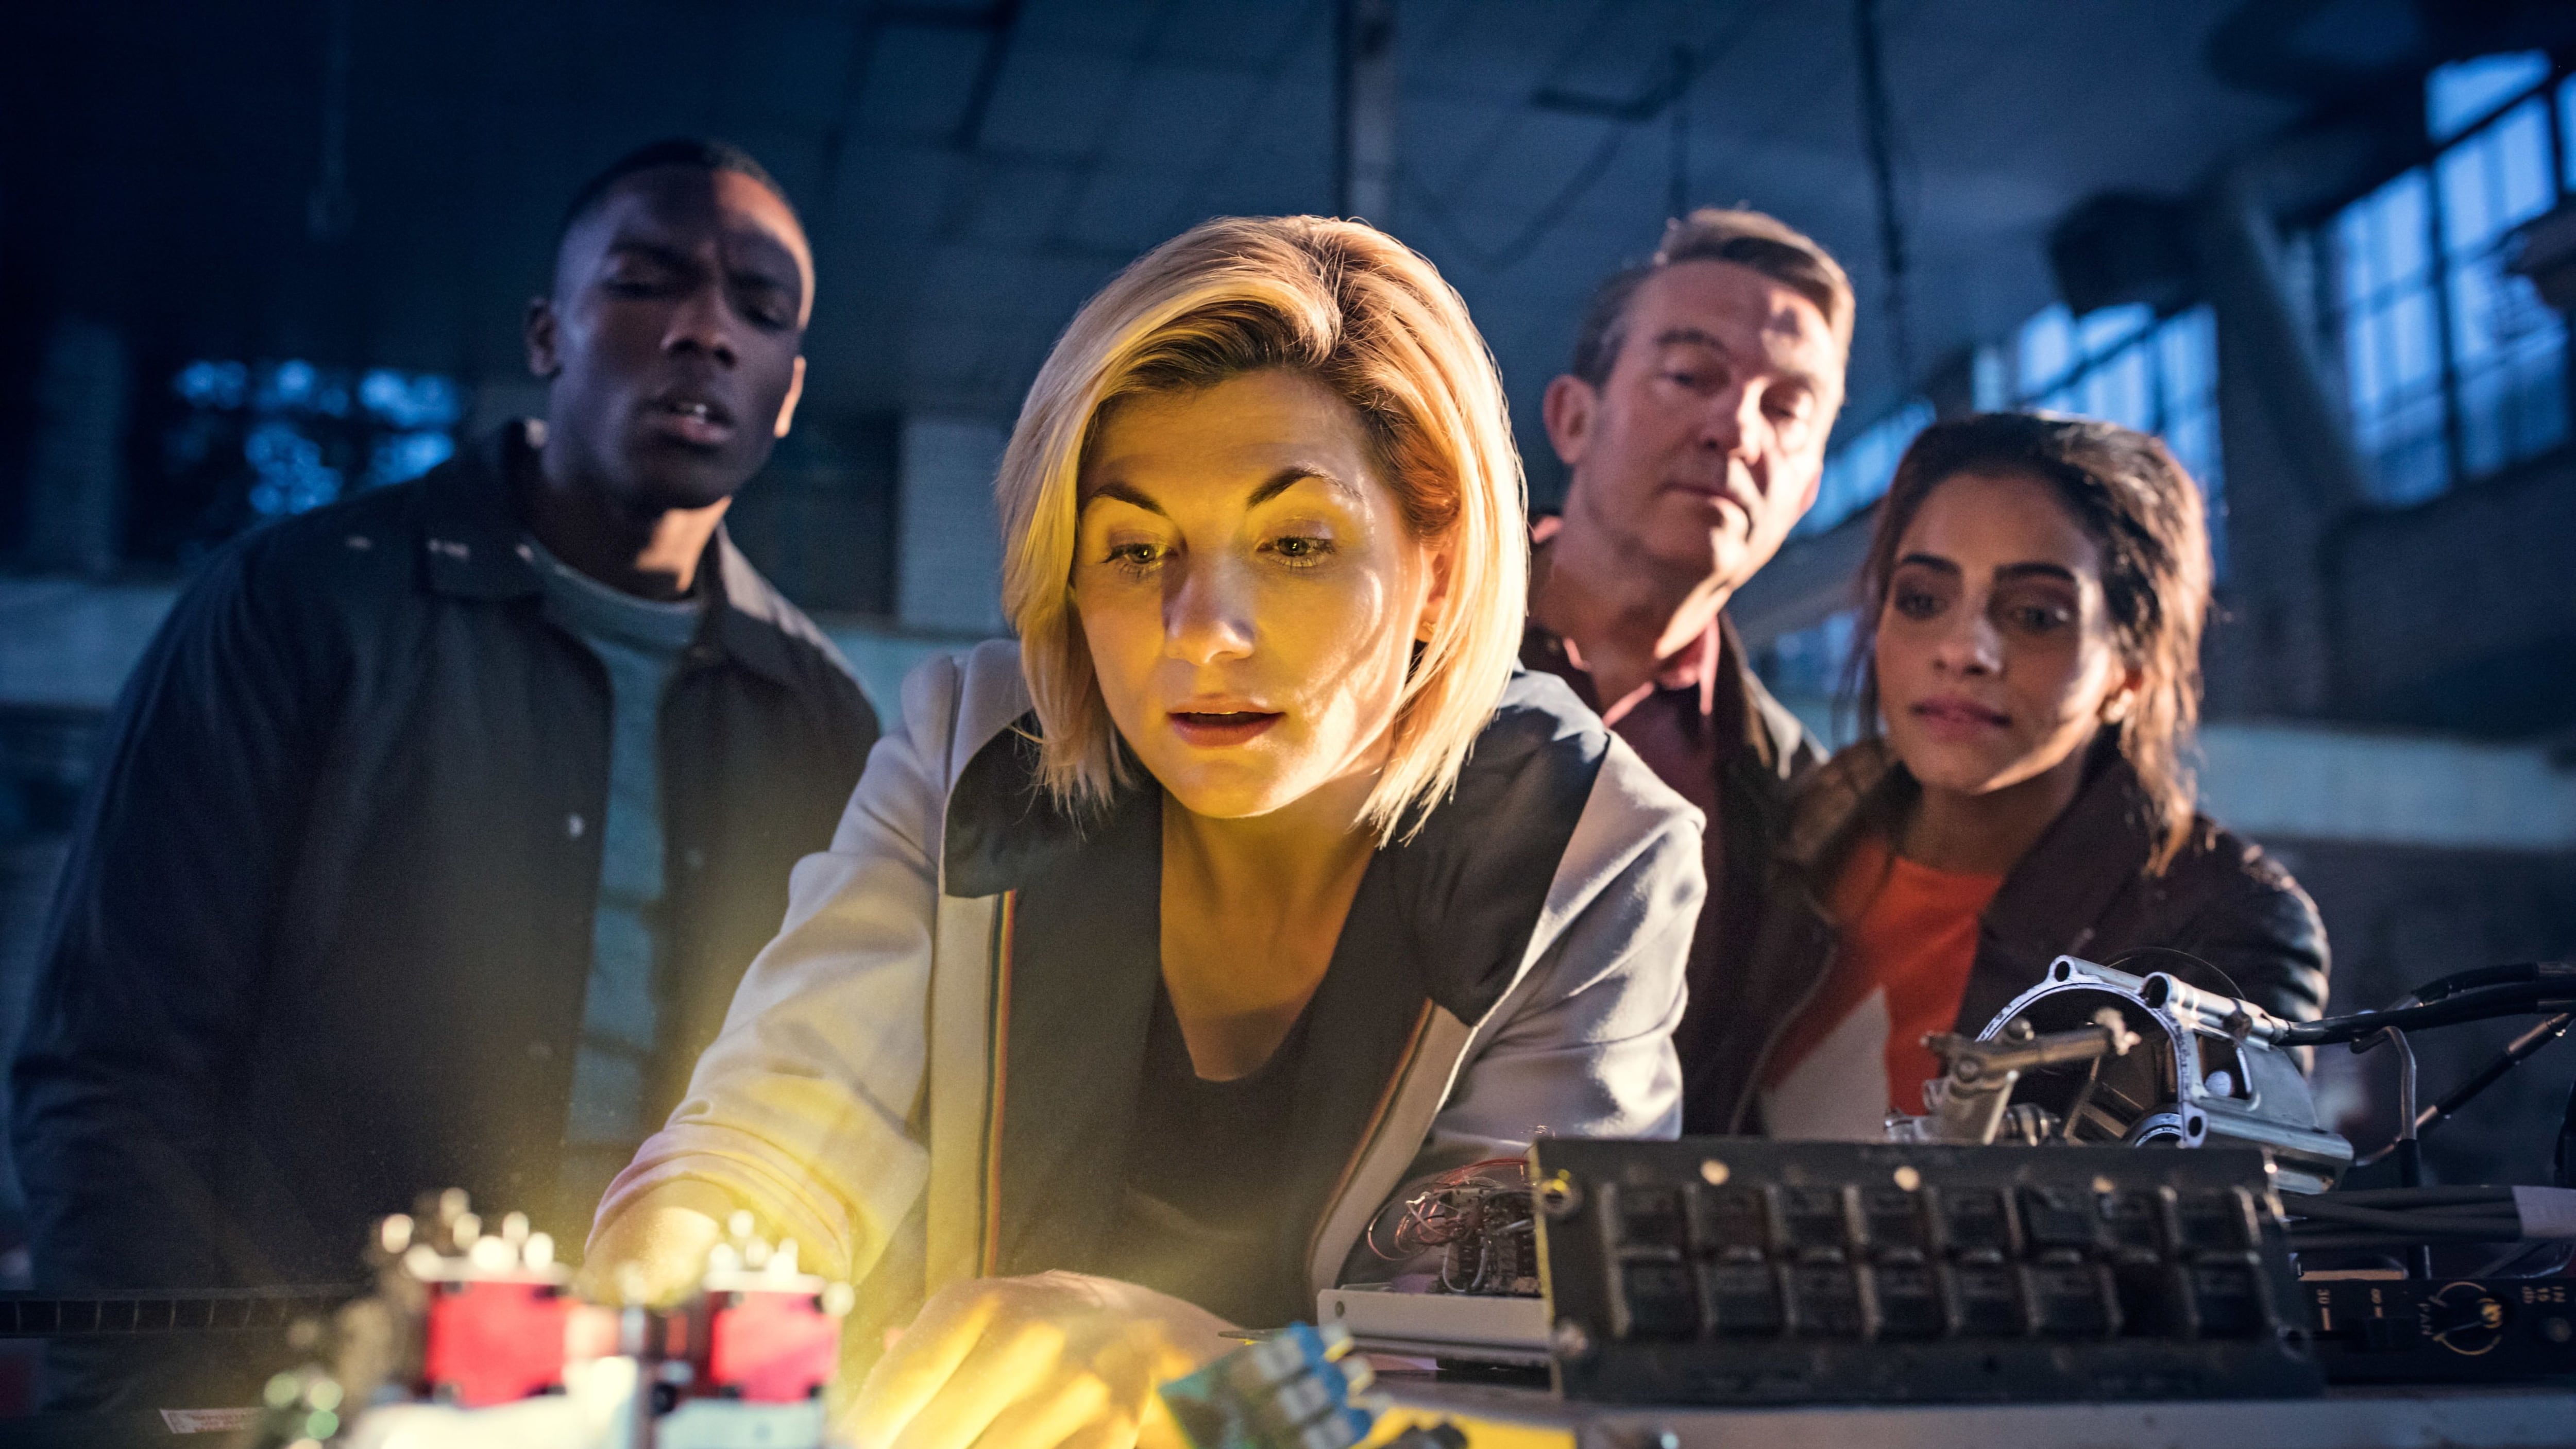 The show’s fans recently got to see a glimpse of Jodie Whittaker in the role for the first time.